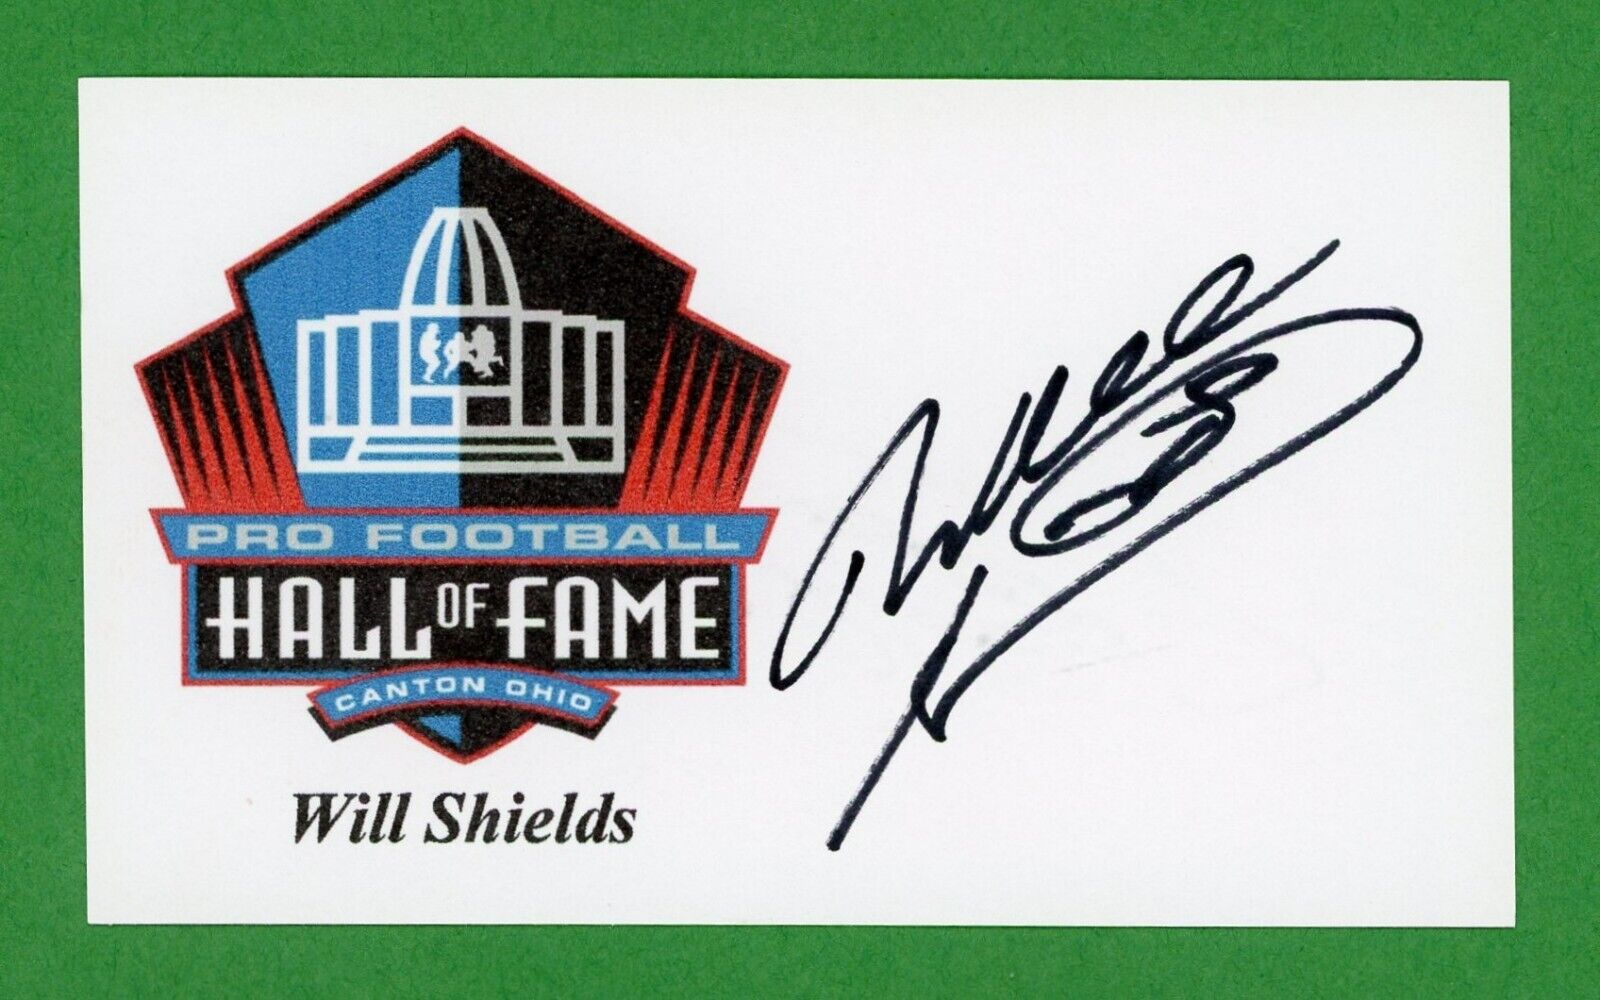 Will Shields Football Hall of Fame Signed 3x5 Index IMAGE Card X1416